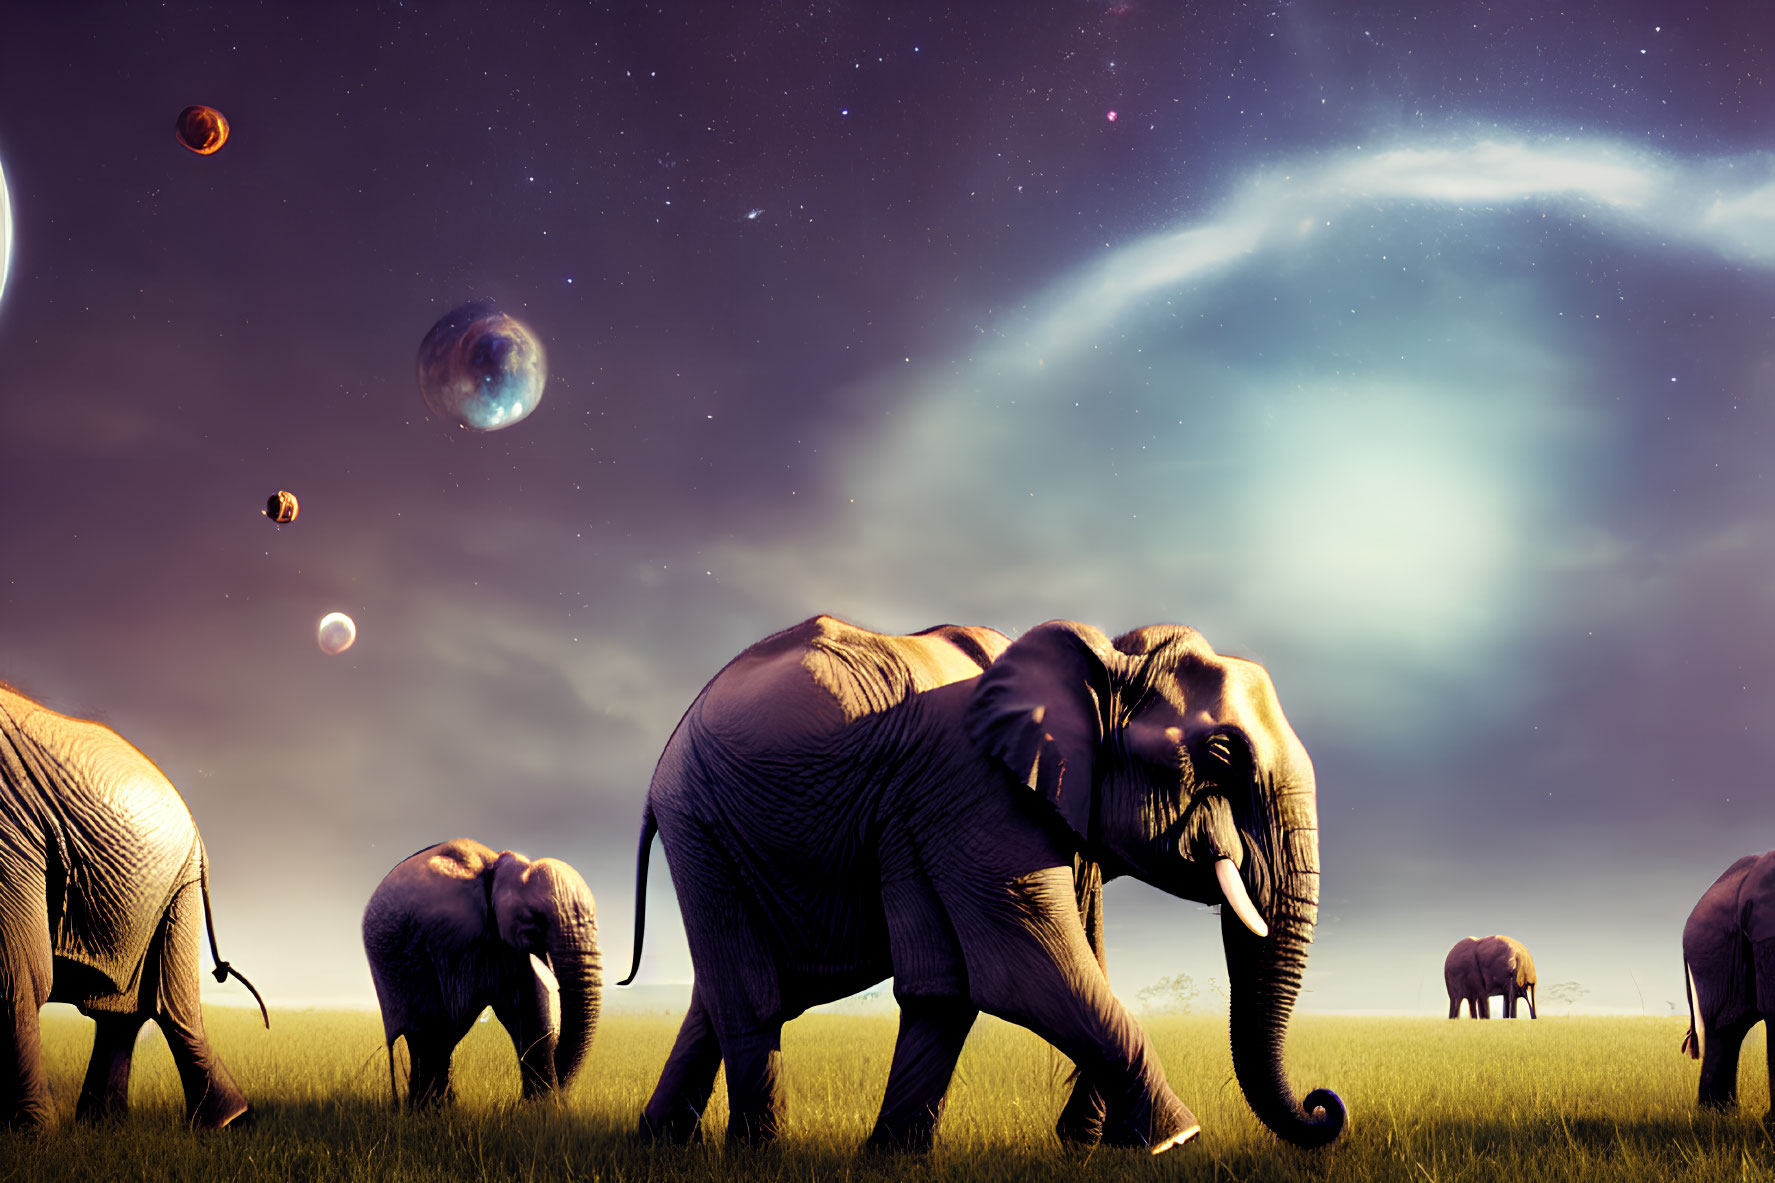 Elephants walking under starry sky with galaxies and planets